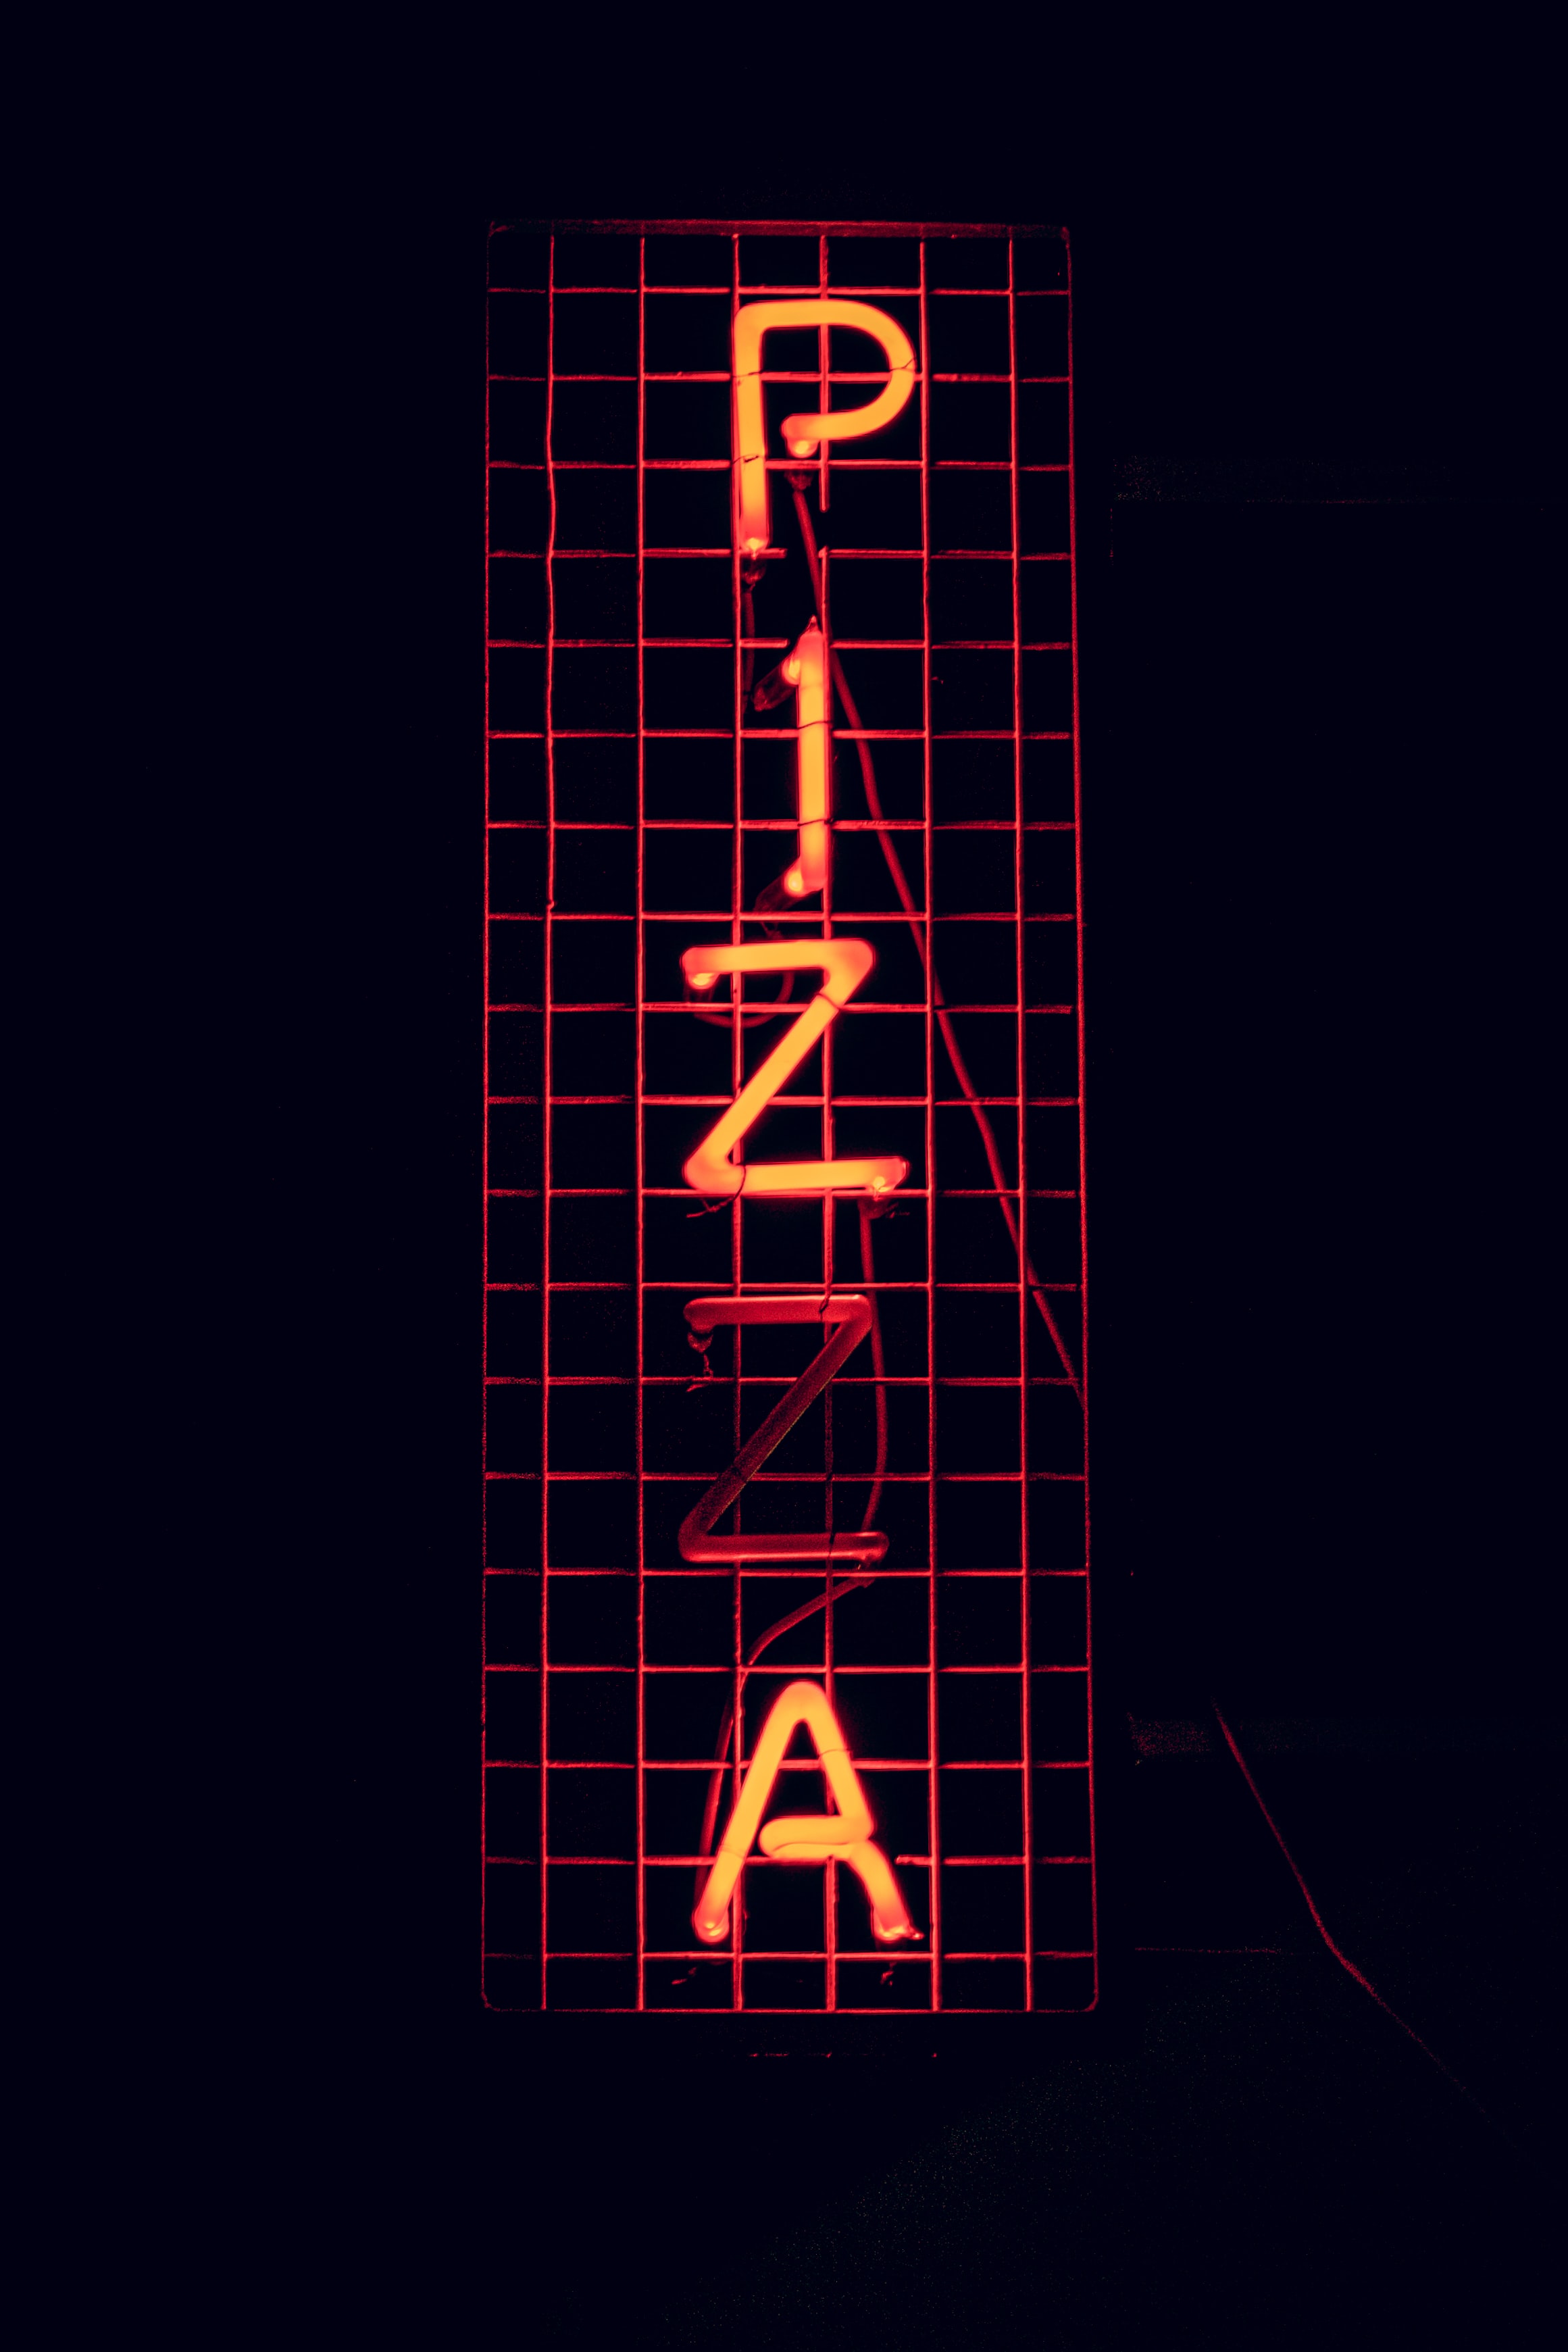 pizza, text, signboard, dark, words, neon, sign High Definition image